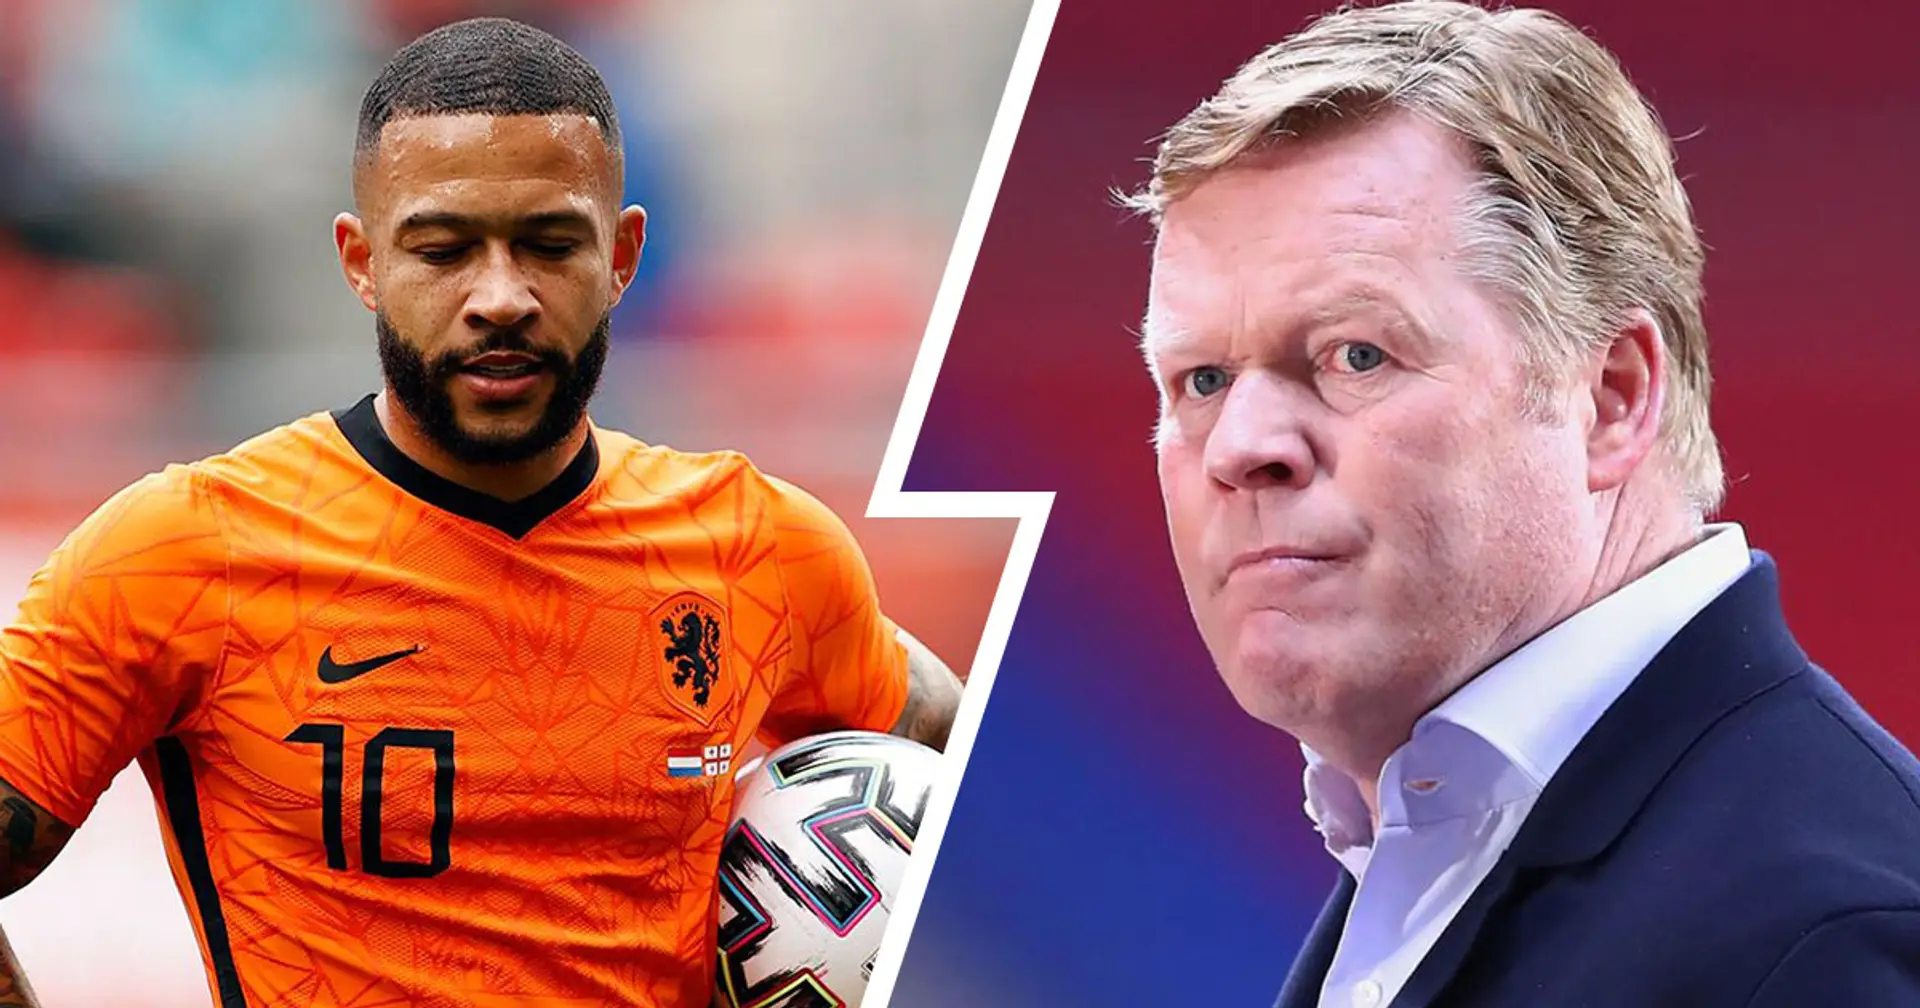 Depay 'has already been signed': Source close to Koeman